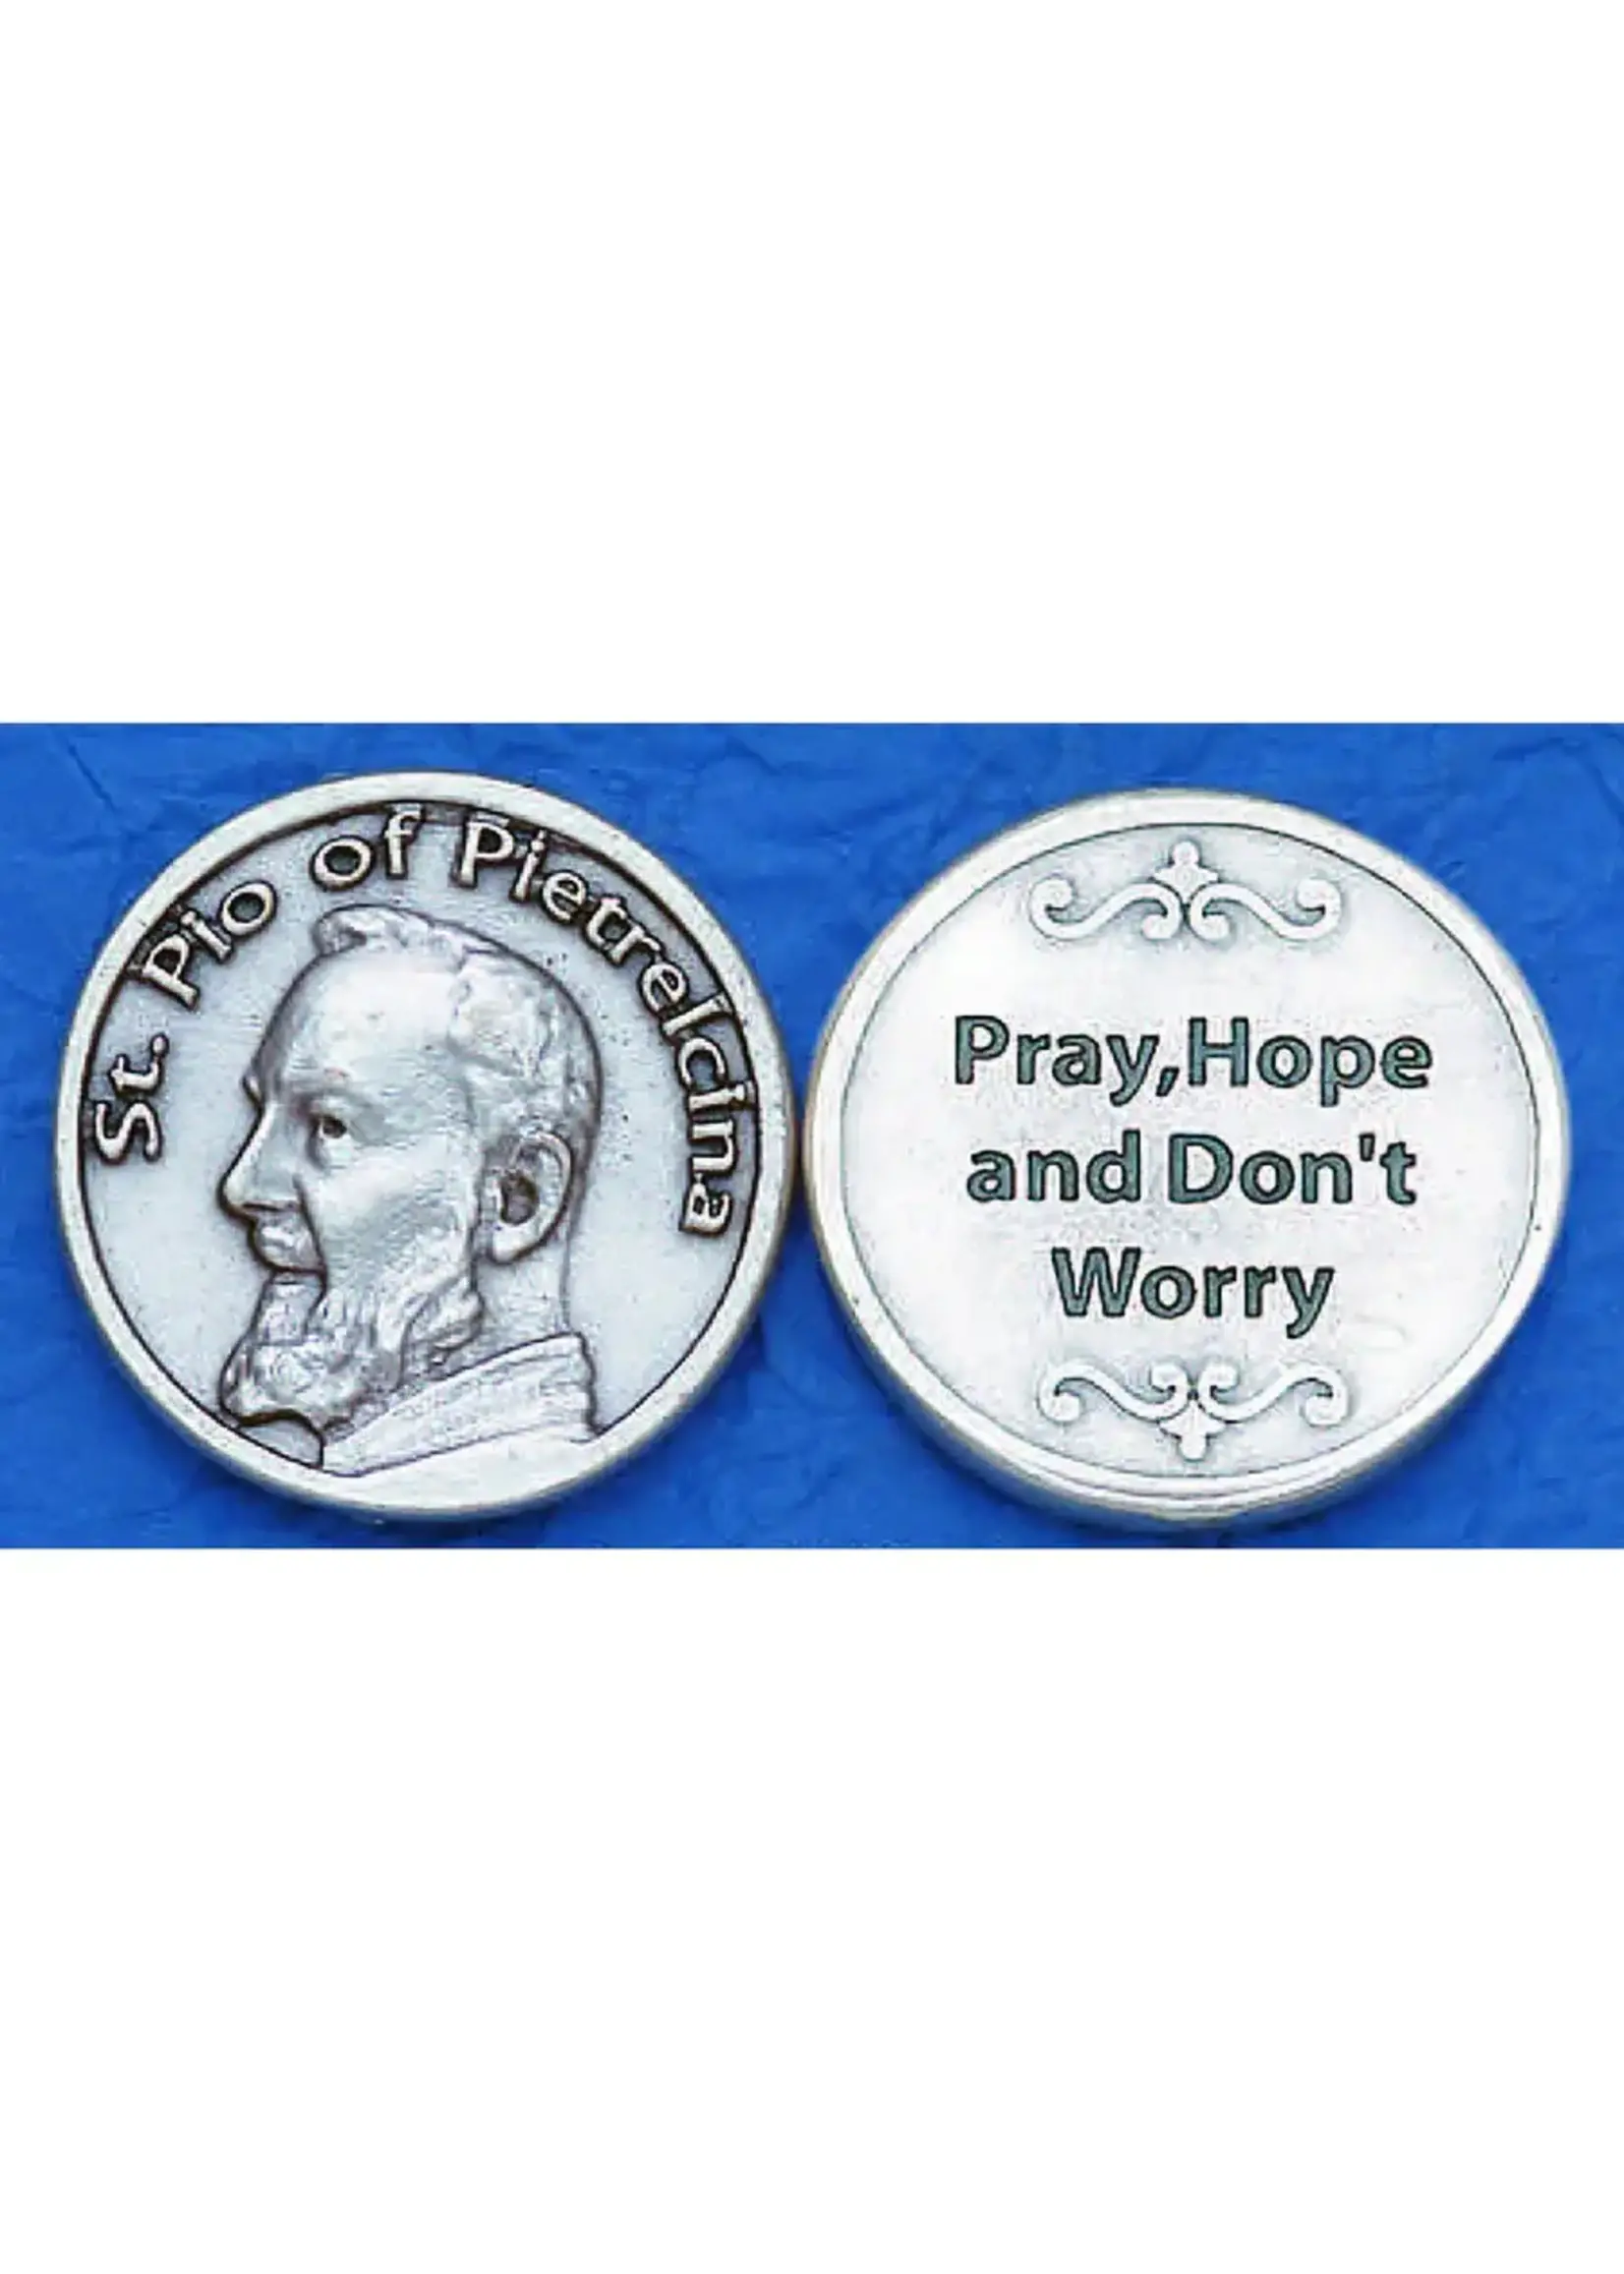 Padre Pio "Pray, Hope, and Don't Worry" pocket prayer token/coin